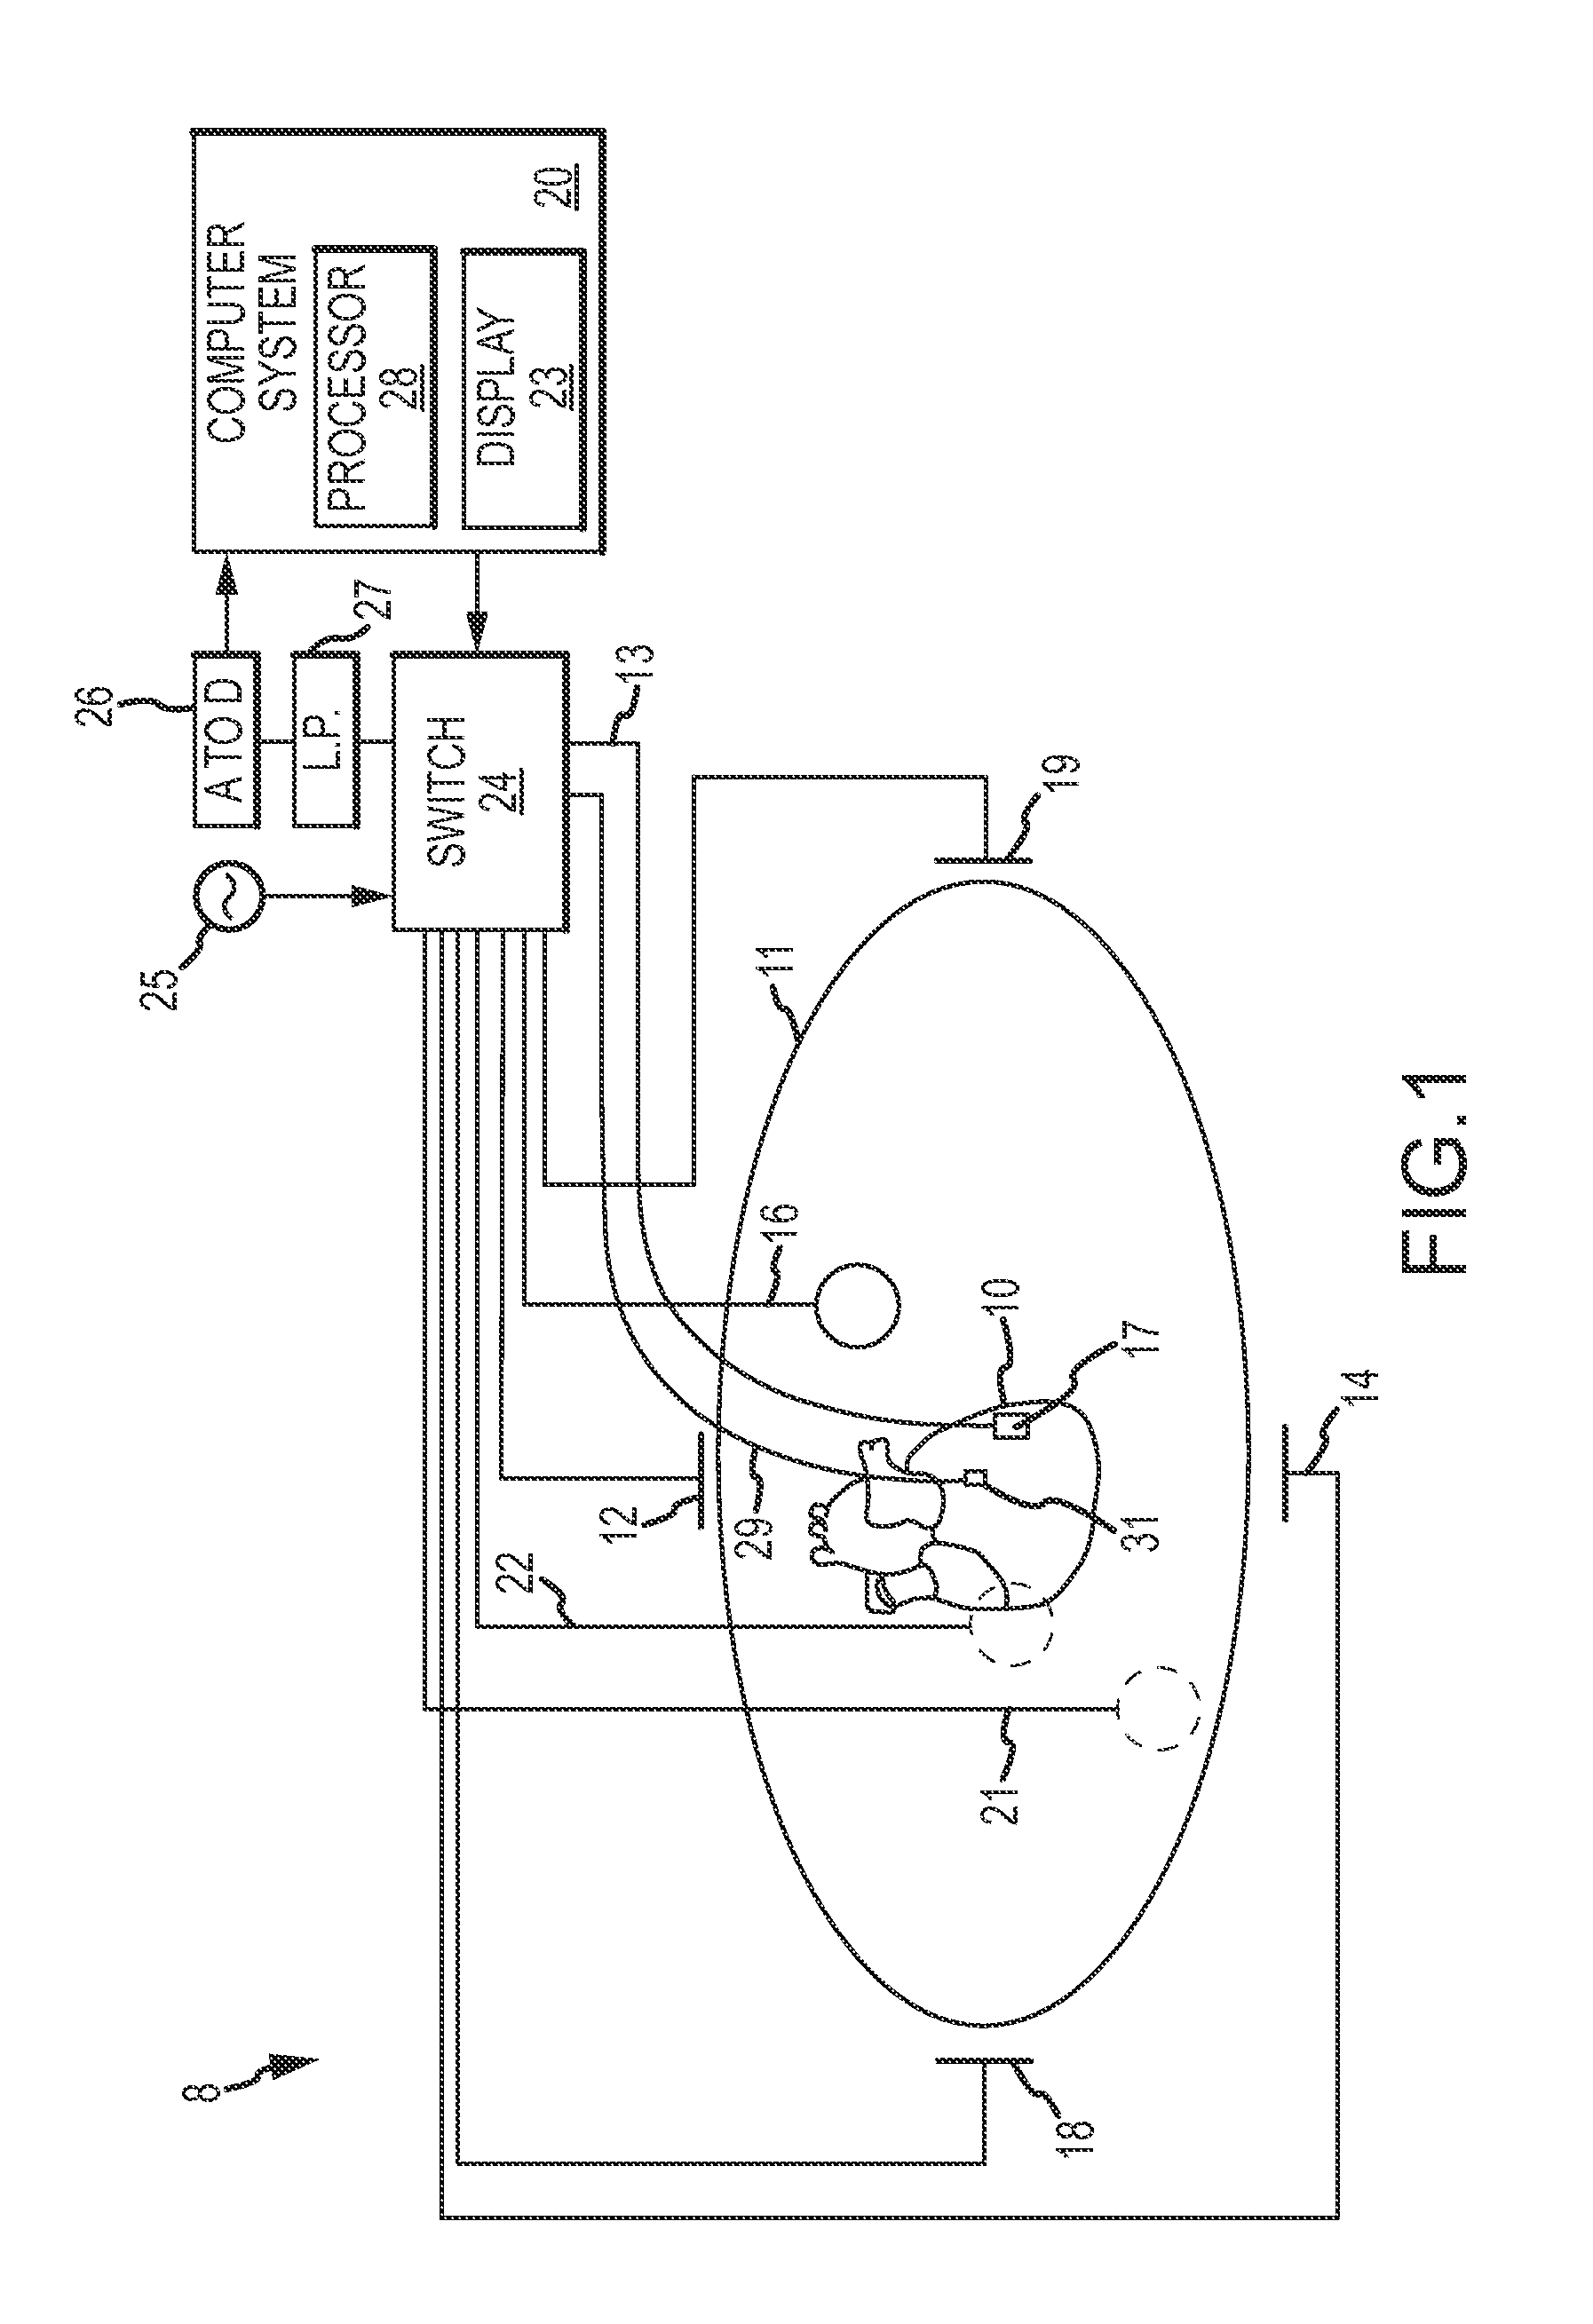 System and Method for Generating Electrophysiology Maps